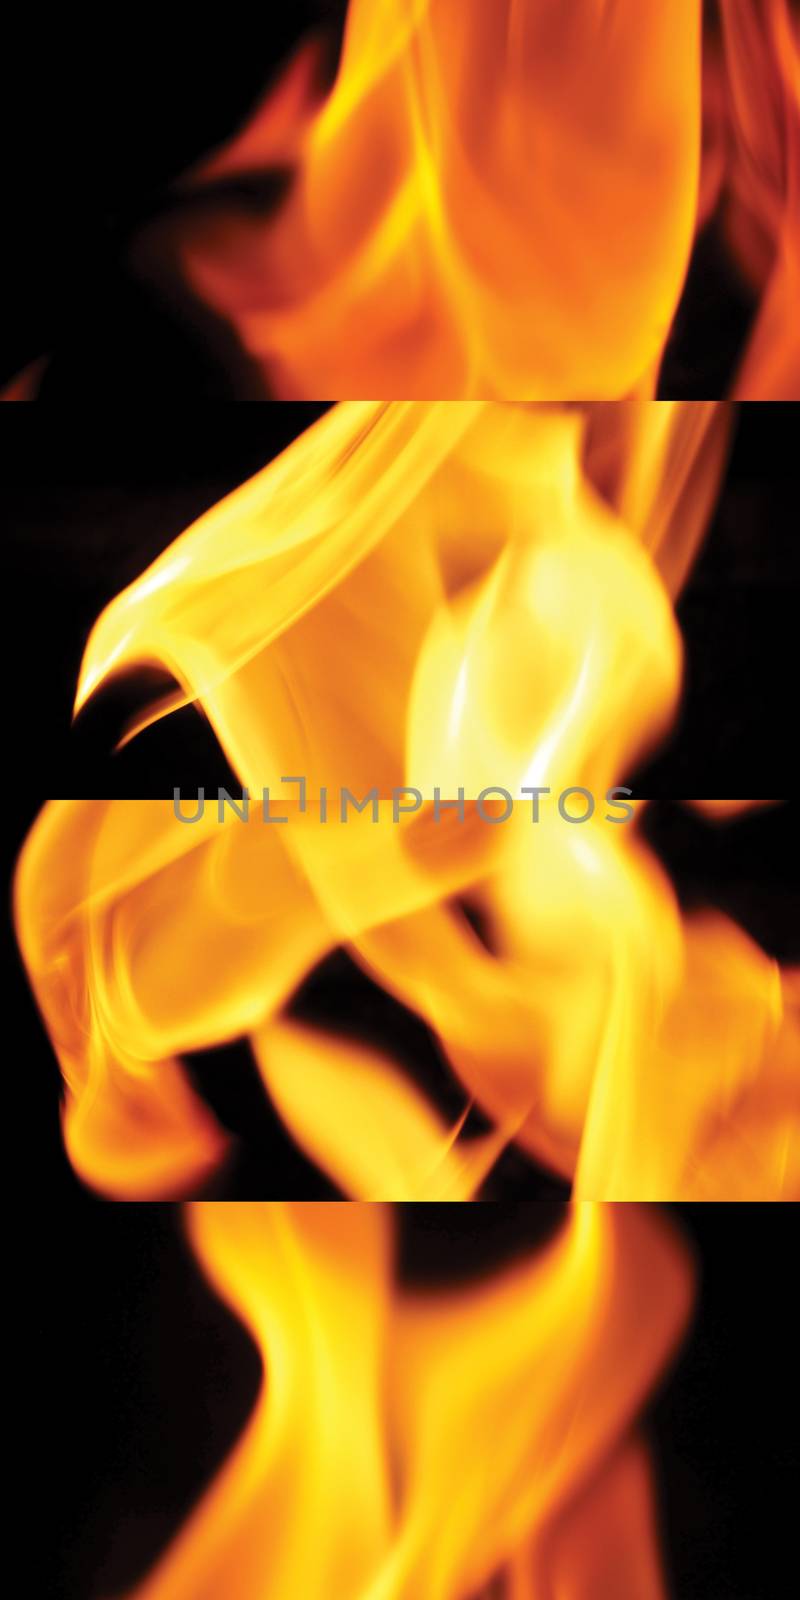 Fire for cooking is blazing dangerously close-up and yellow color on the black background.